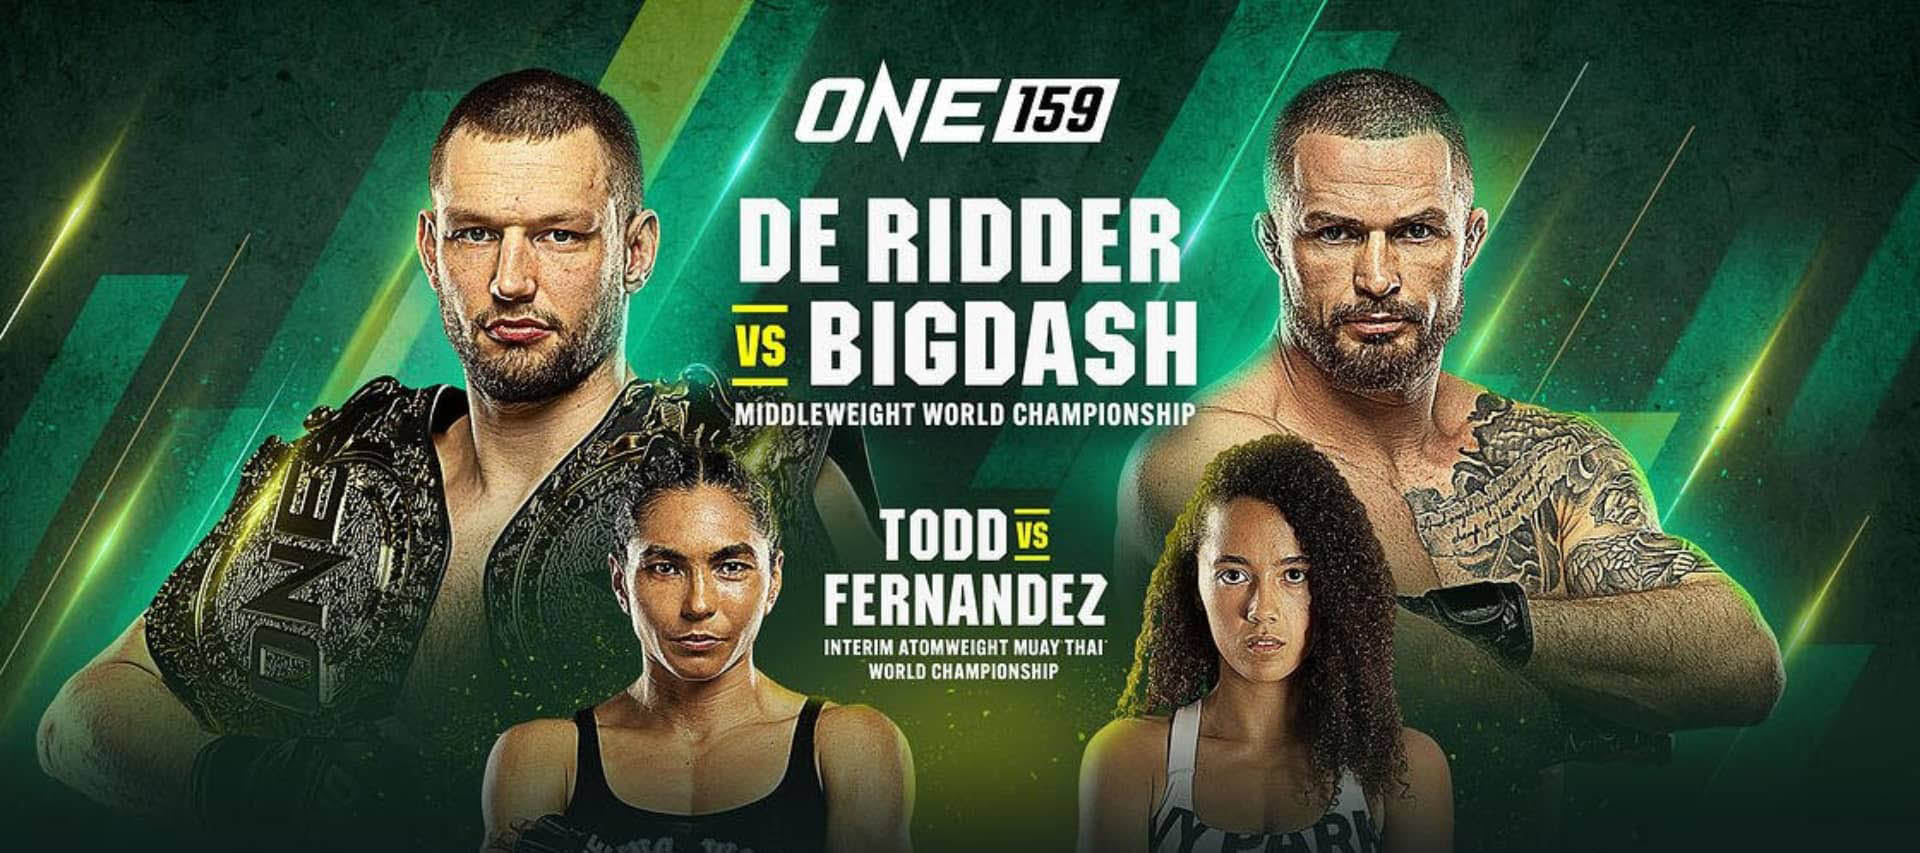 ONE Championship159 De Ridder Vs Bigdash Betting Analysis & Predictions for Each Fight